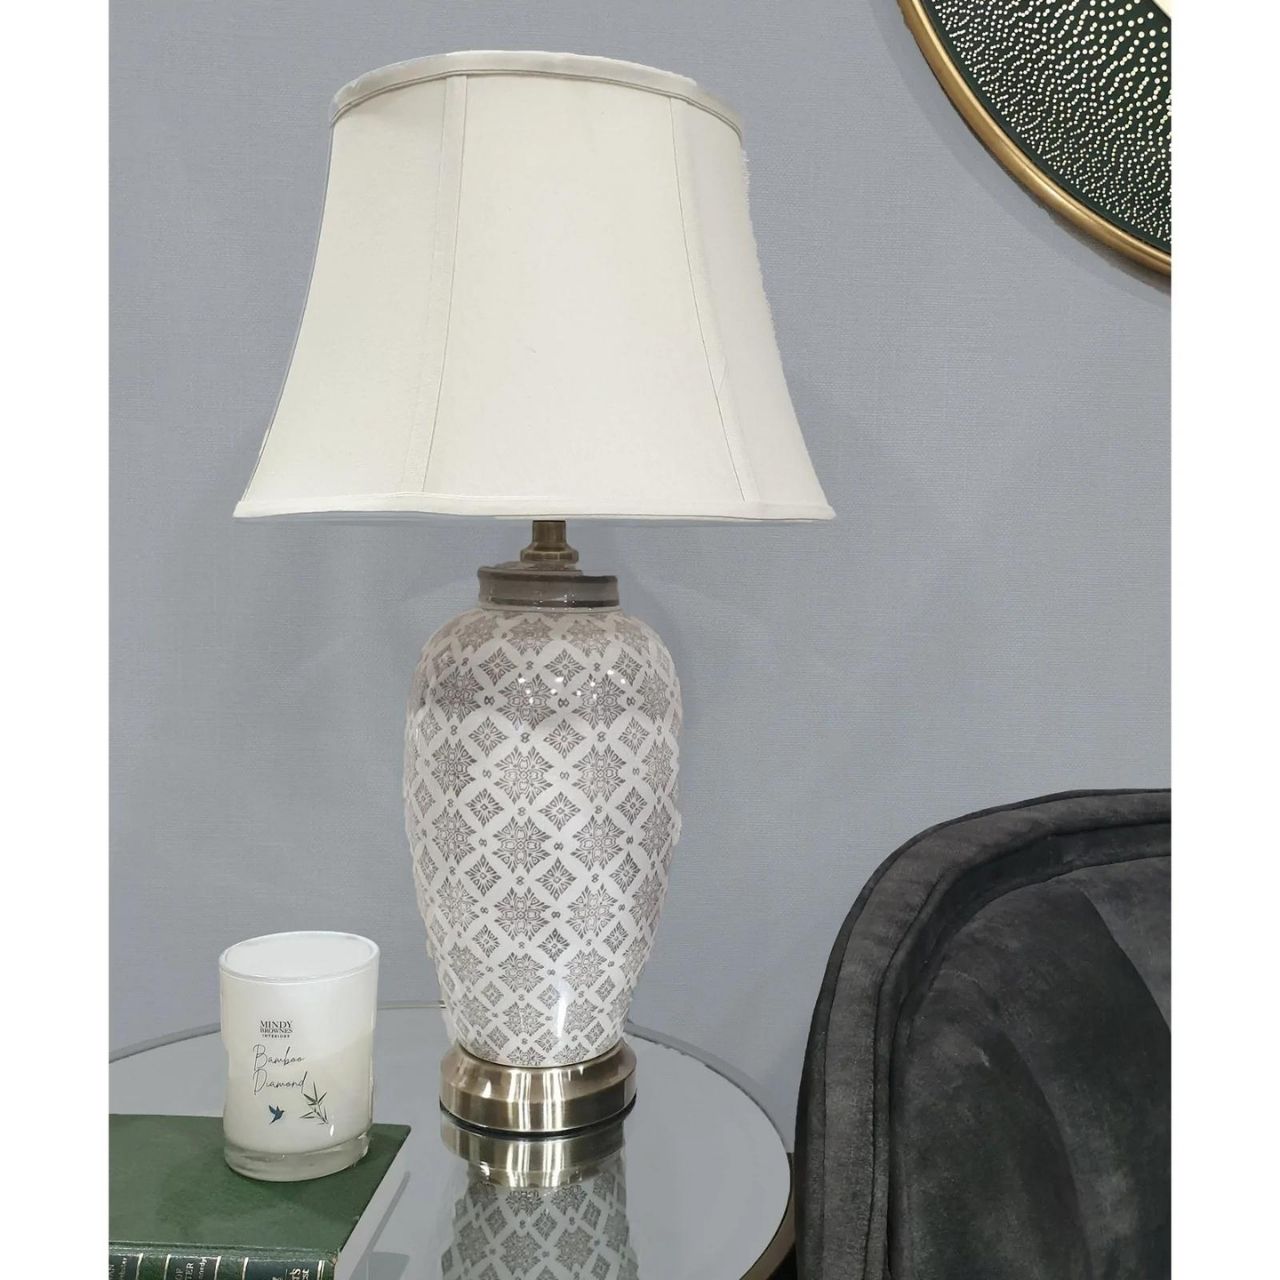 Mindy Brownes Interiors Dawn Lamp  - Mindy Brownes table lamp. - Grey pattern detail, ideal for neutral styling.